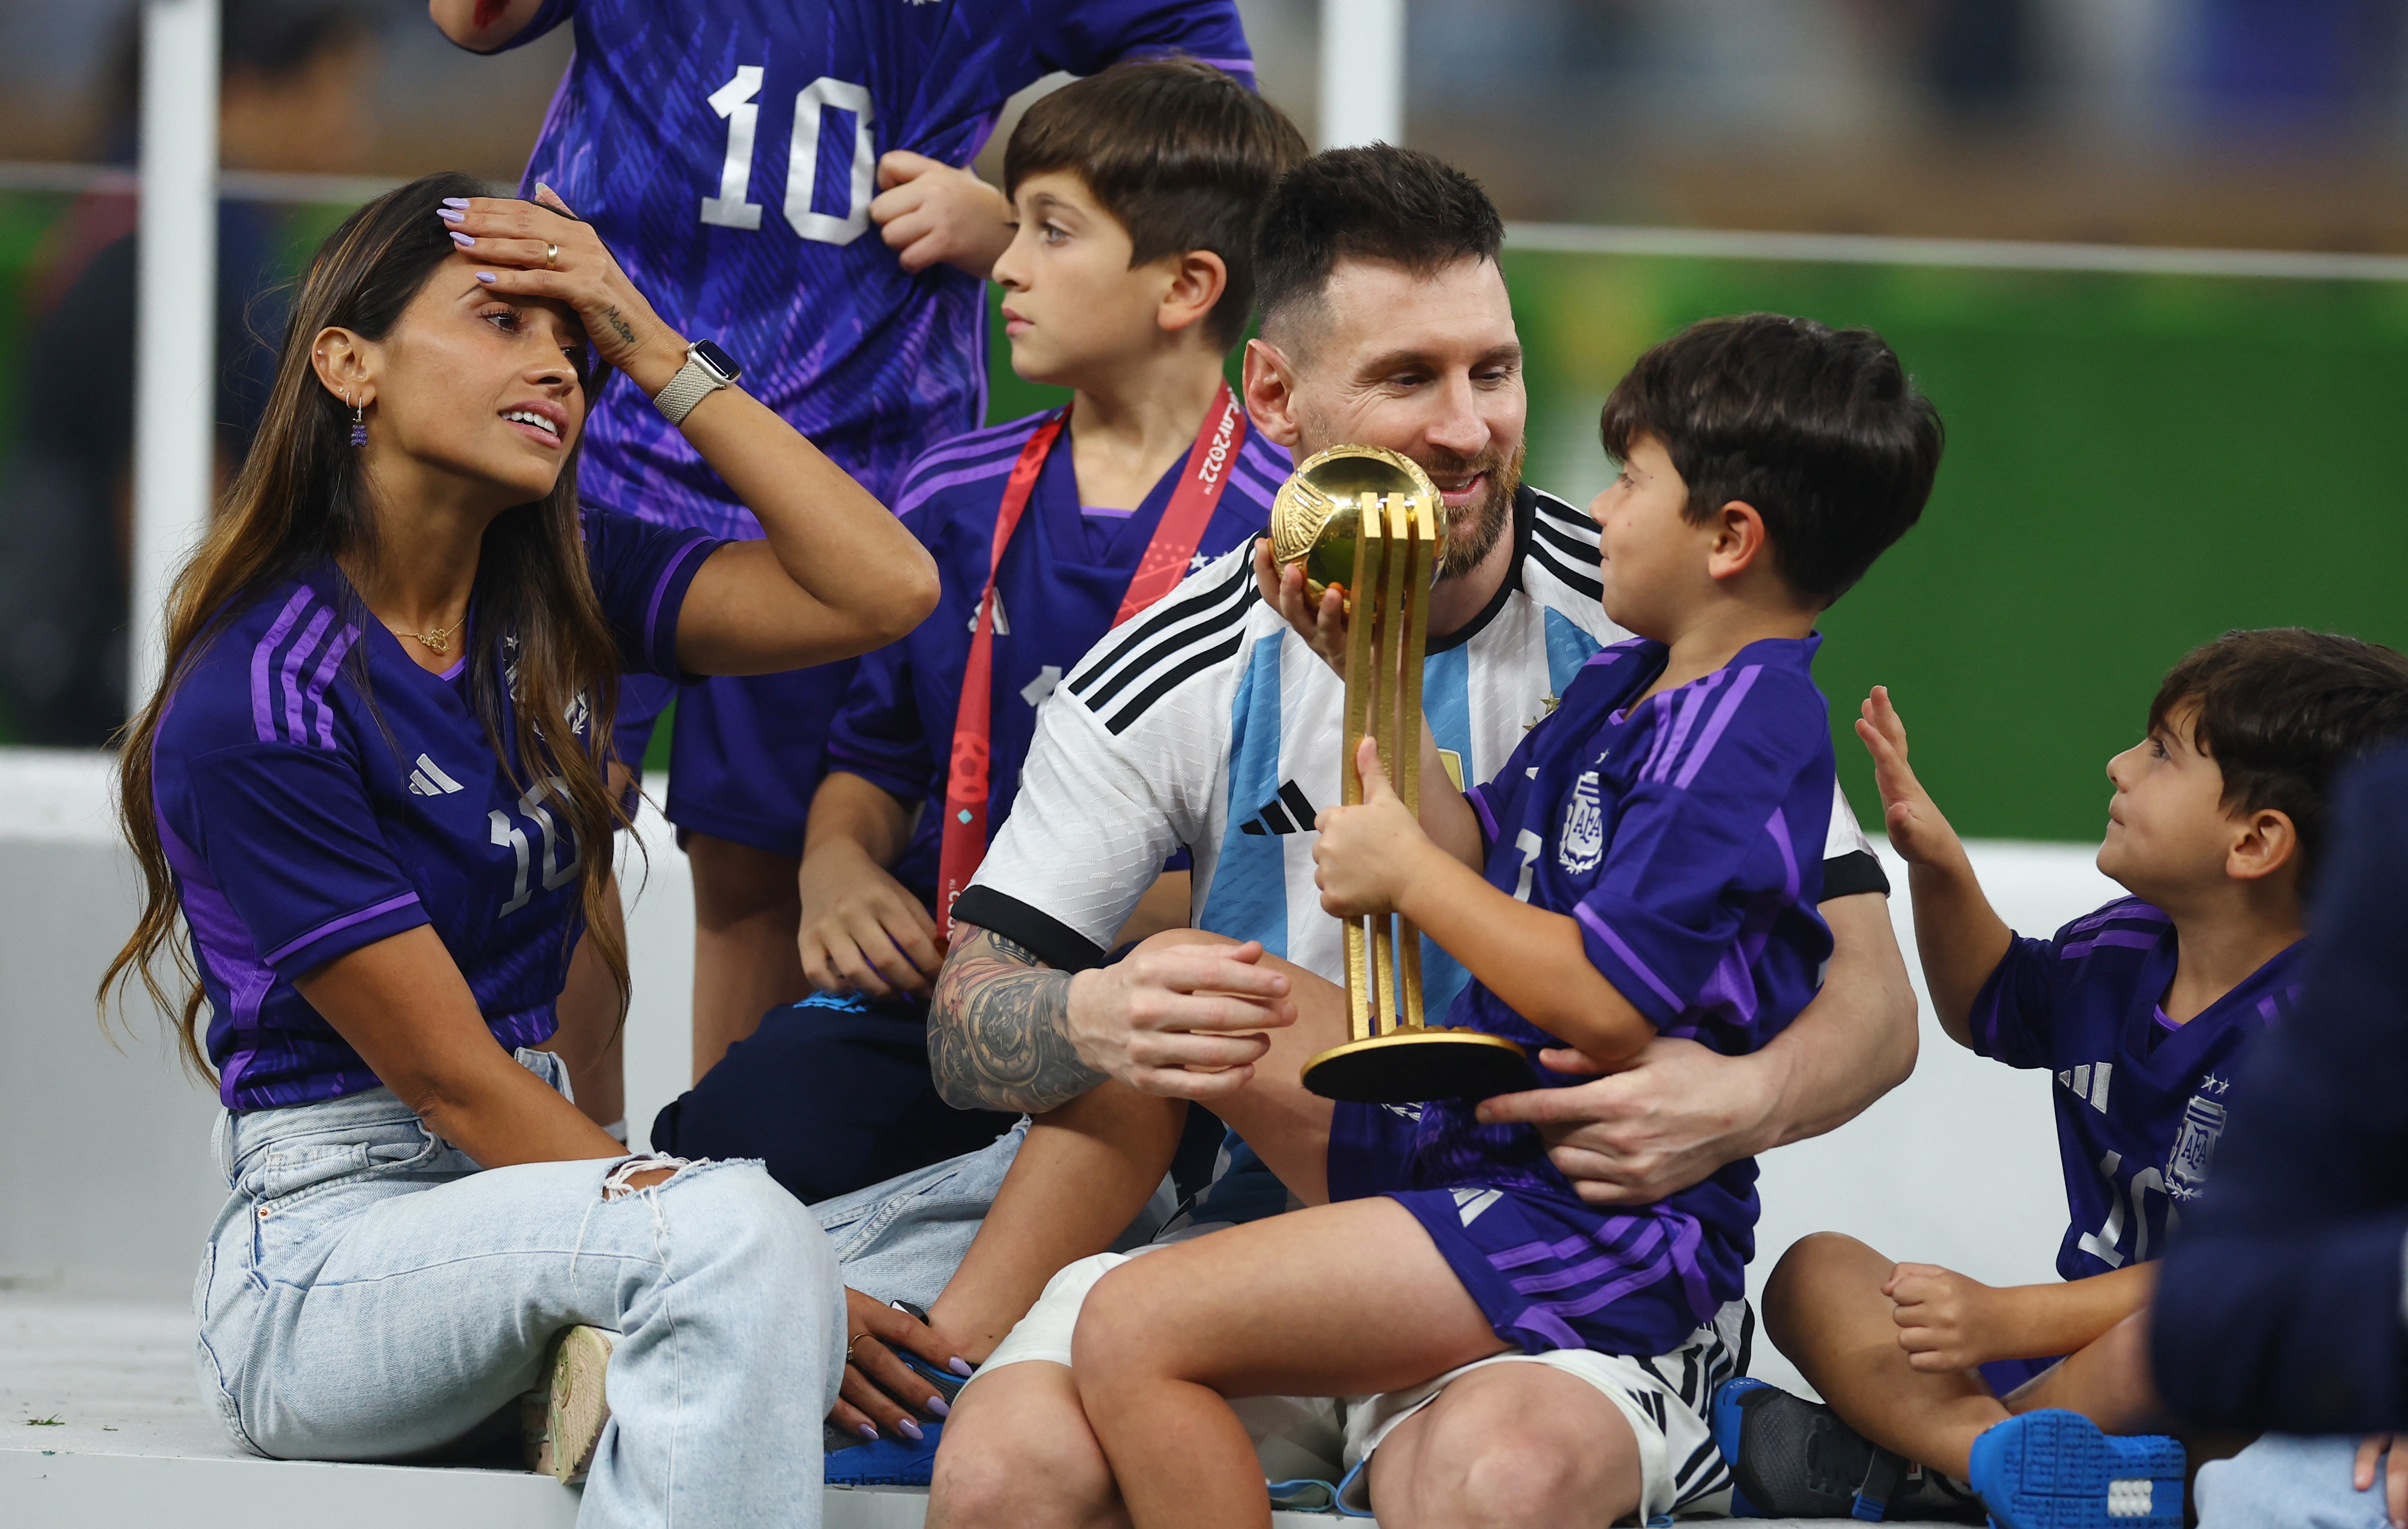 Soccer Football - FIFA World Cup Qatar 2022 - Final - Argentina v France - Lusail Stadium, Lusail, Qatar - December 18, 2022 Argentina's Lionel Messi celebrates with his wife, Antonela Roccuzzo, and their children after winning the World Cup REUTERS/Kai Pfaffenbach